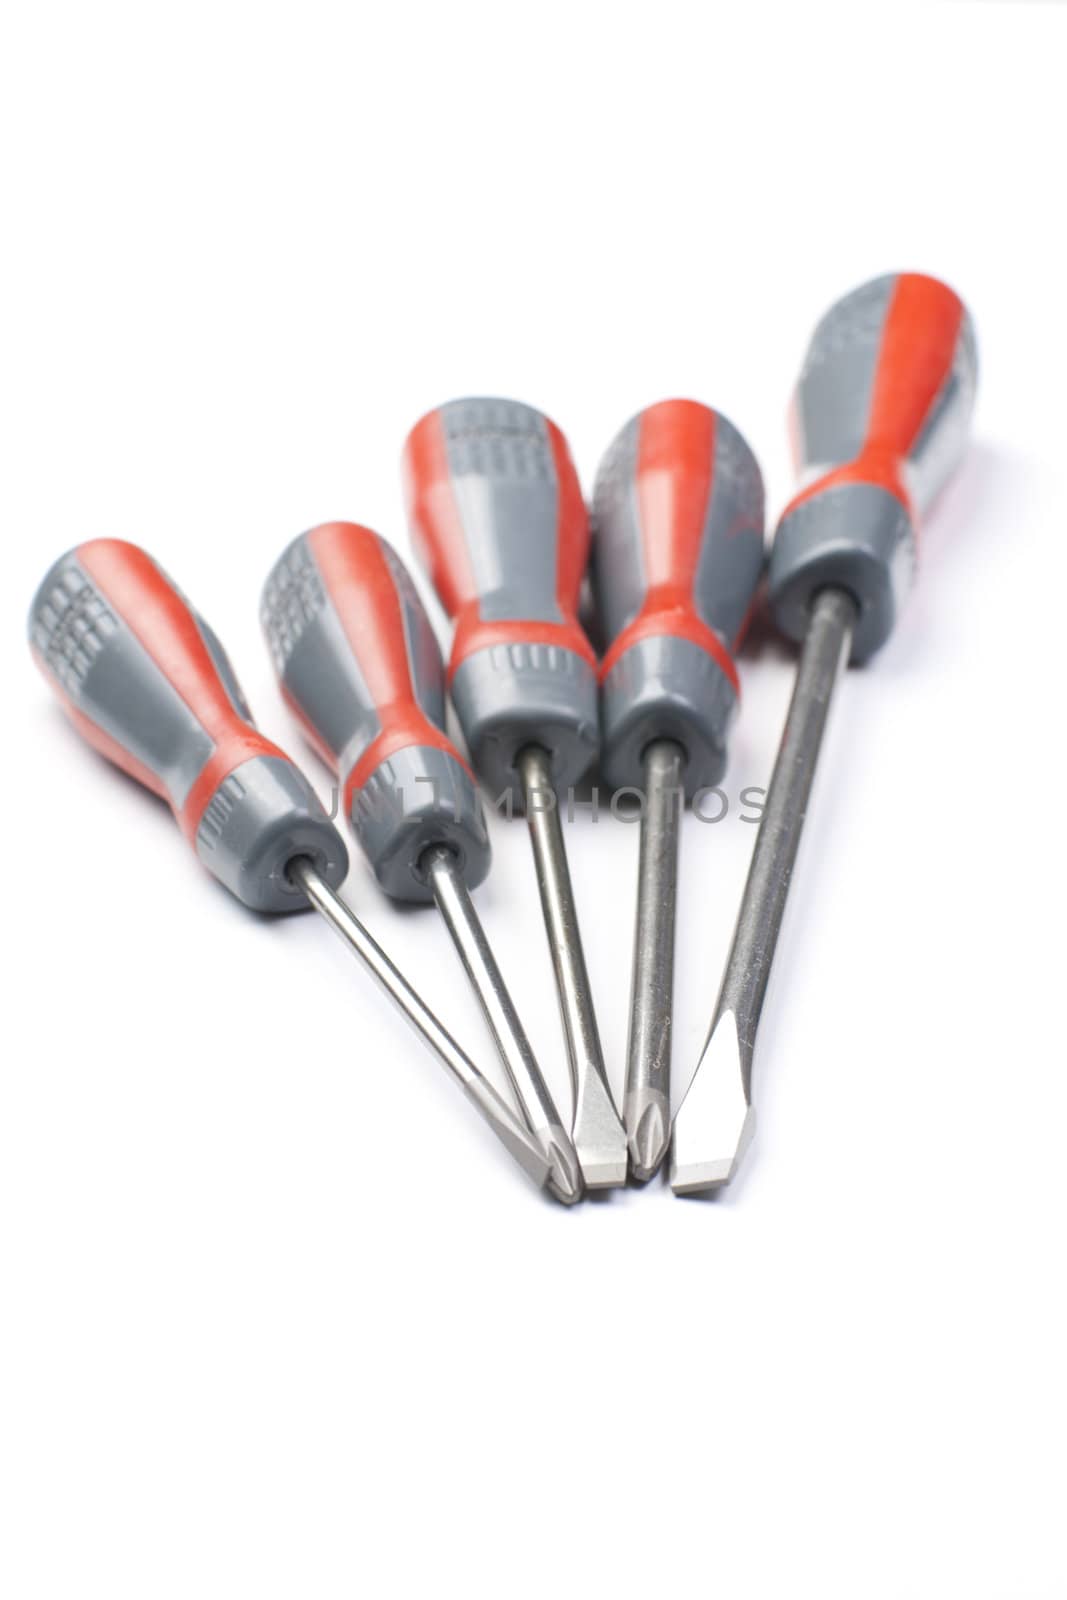 five screwdrivers isotaled on white background